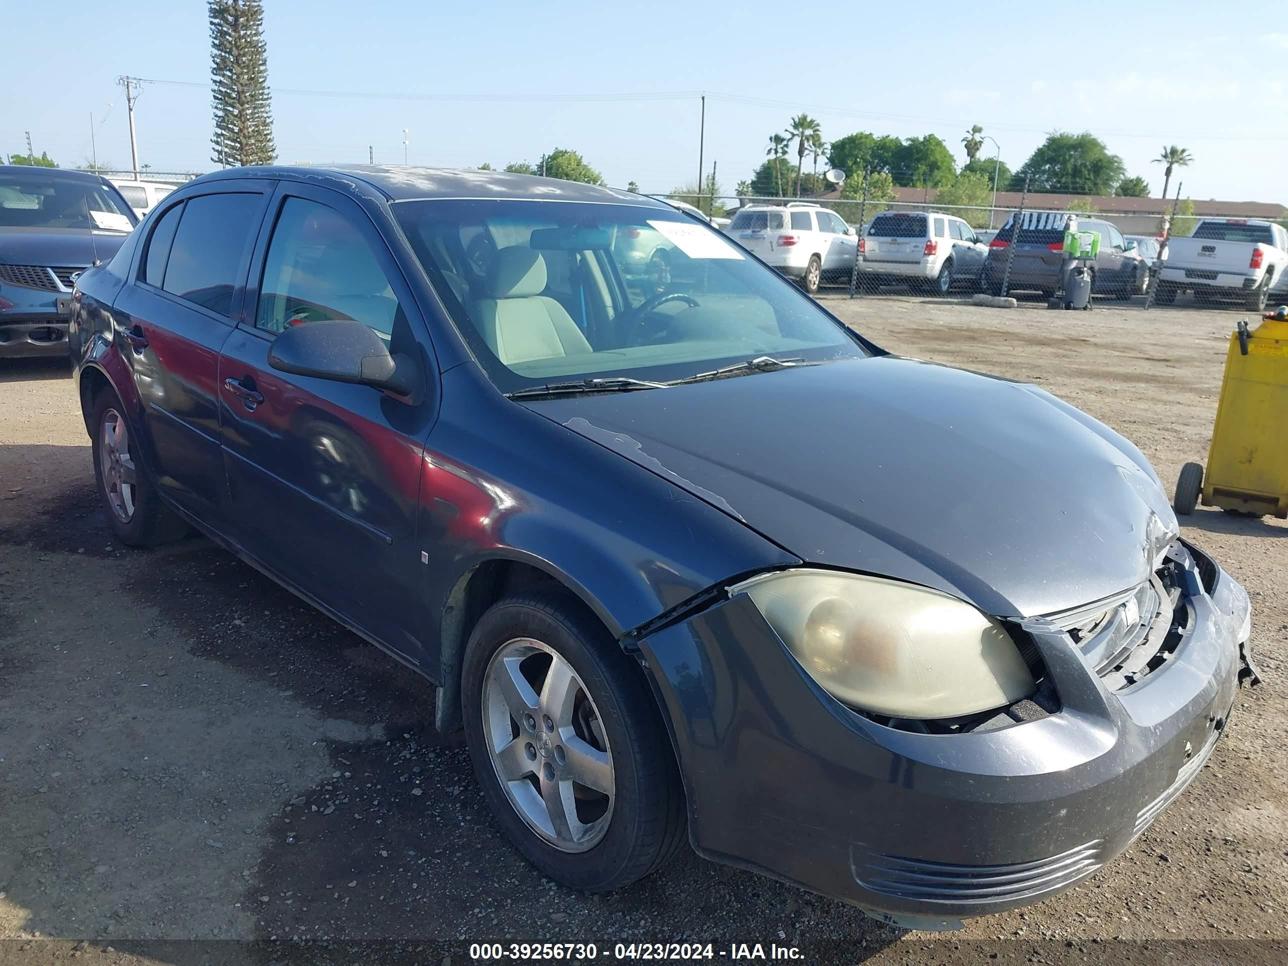 vin: 1G1AT58H497107228 1G1AT58H497107228 2009 chevrolet cobalt 2200 for Sale in 93705, 1805 N Lafayette Ave, Fresno, California, USA